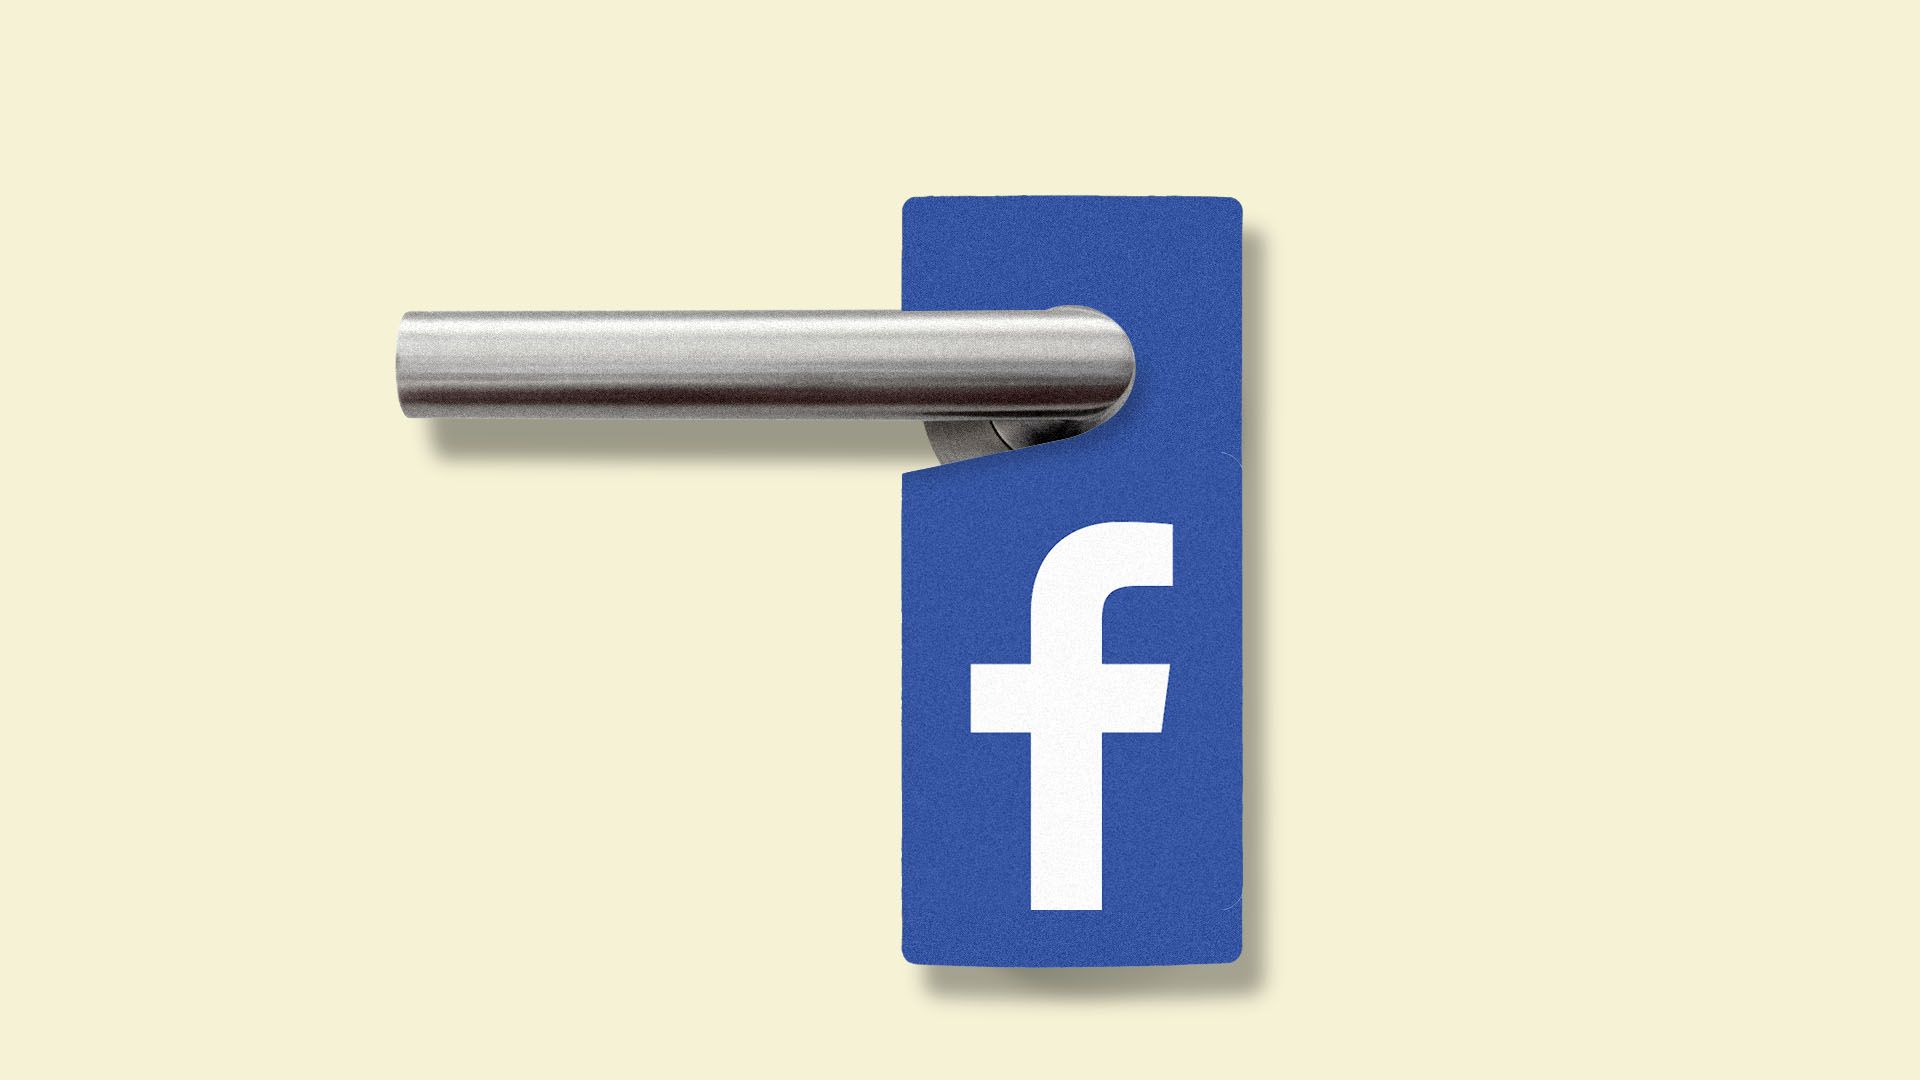 Illustration of do not disturb tag with Facebook logo on it